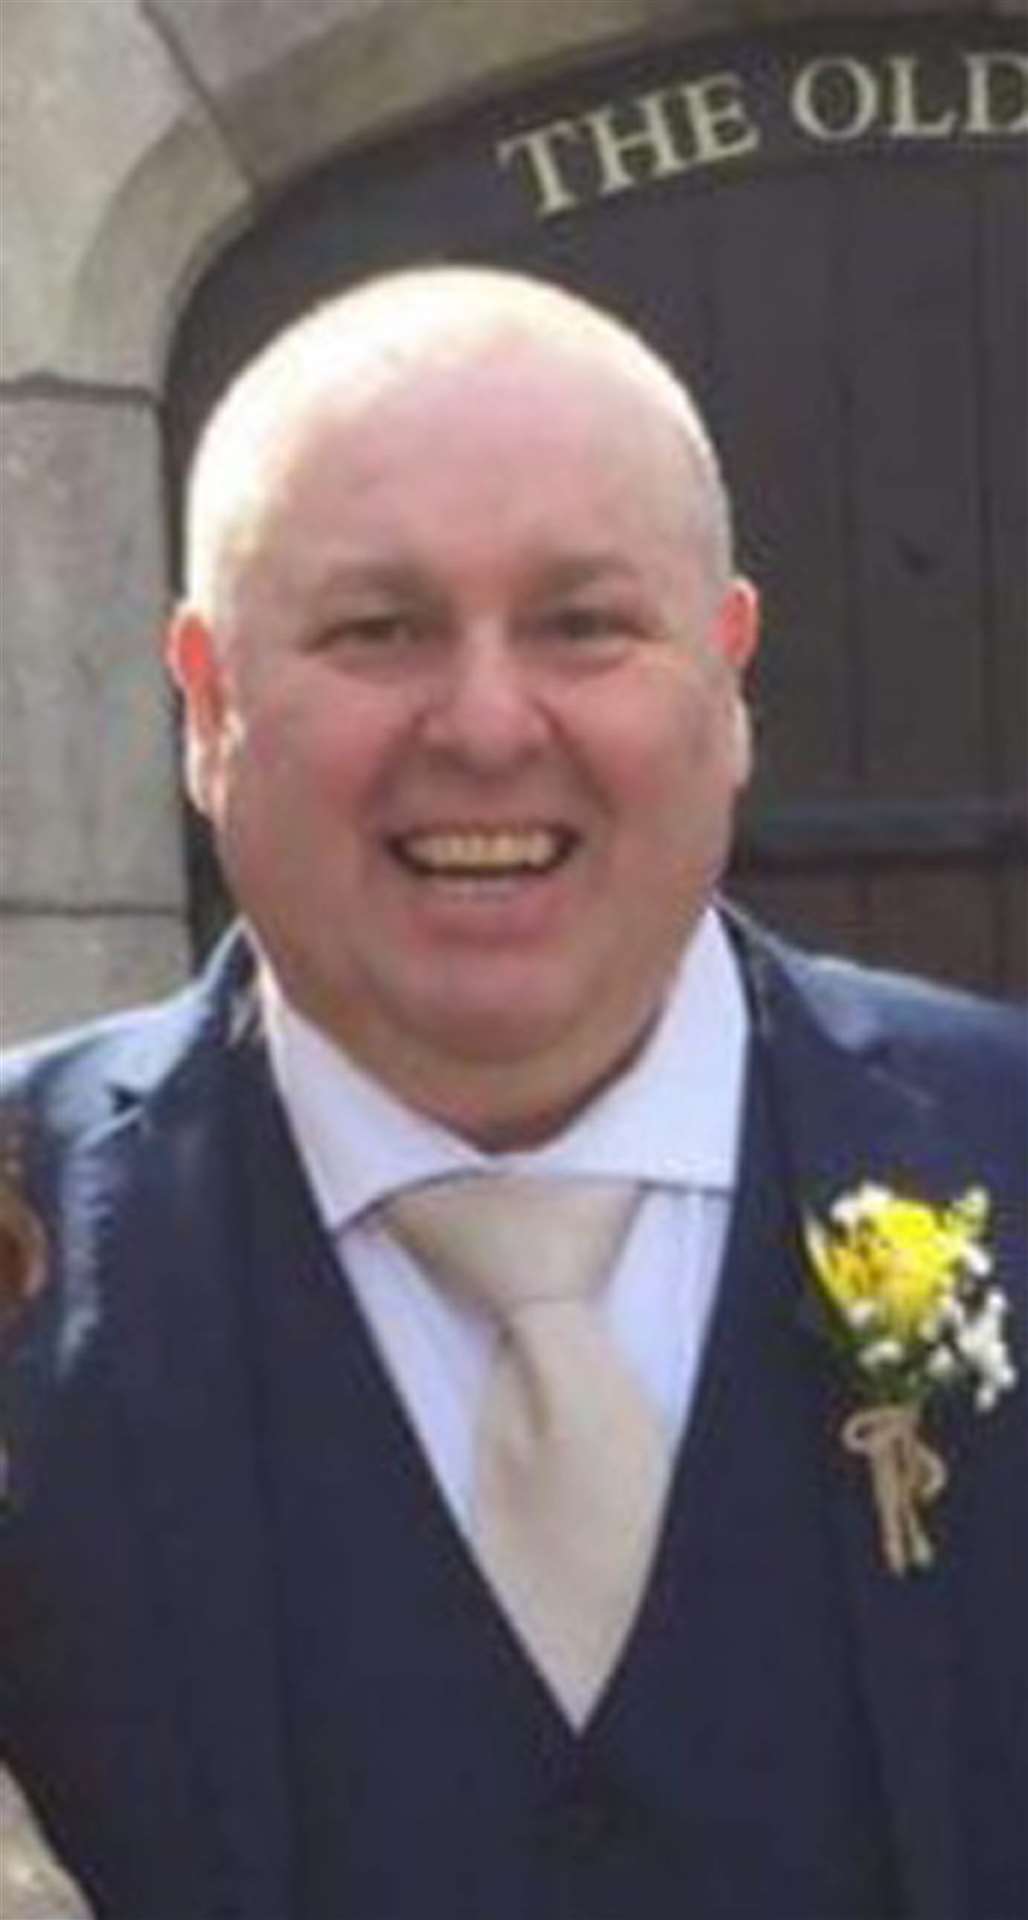 Mark Lang was described as a ‘hardworking’ man during the trial (South Wales Police/PA)